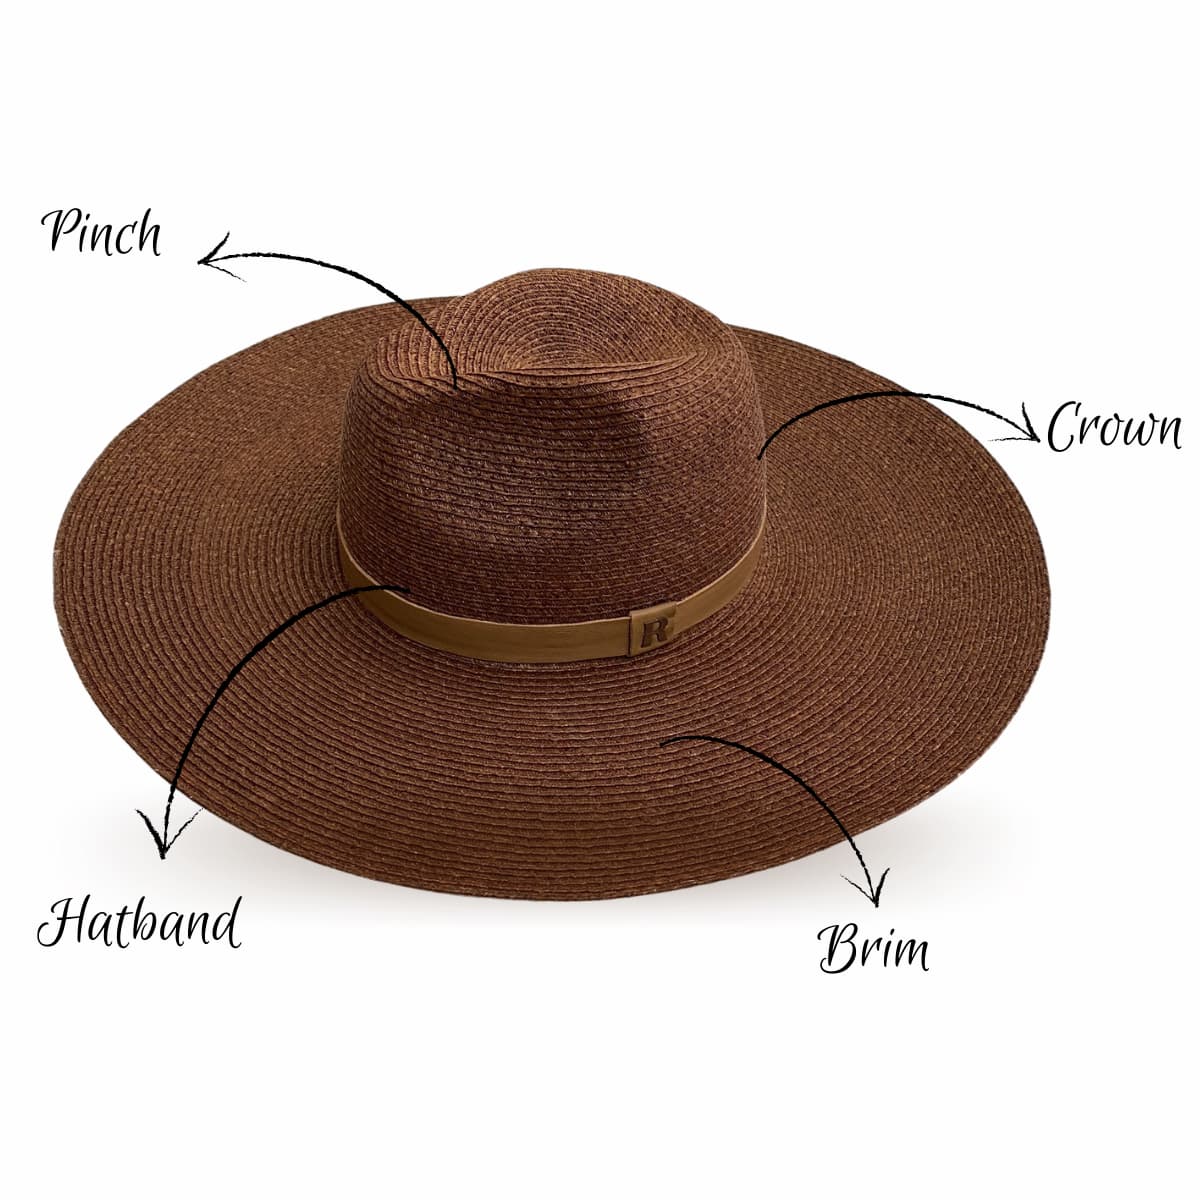 How To: Take Care of Summer Straw Hats 